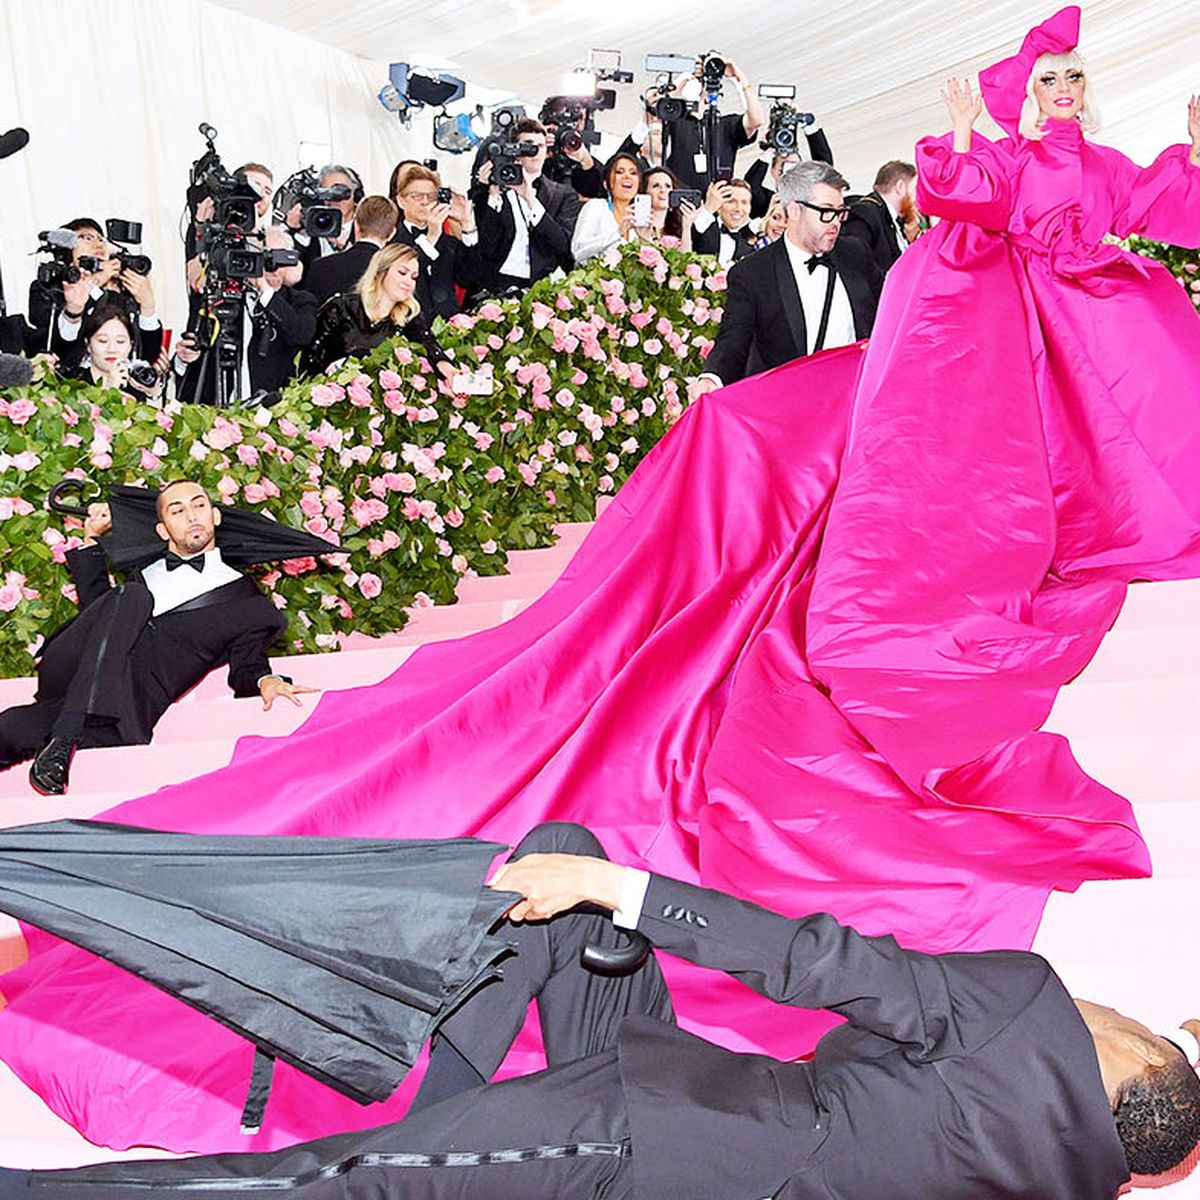 Lady Gaga Owns Met Gala 2019 With Multiple Outfit Changes, Strips Her Brandon  Maxwell Cape Dress to Reveal Black Lingerie Underneath